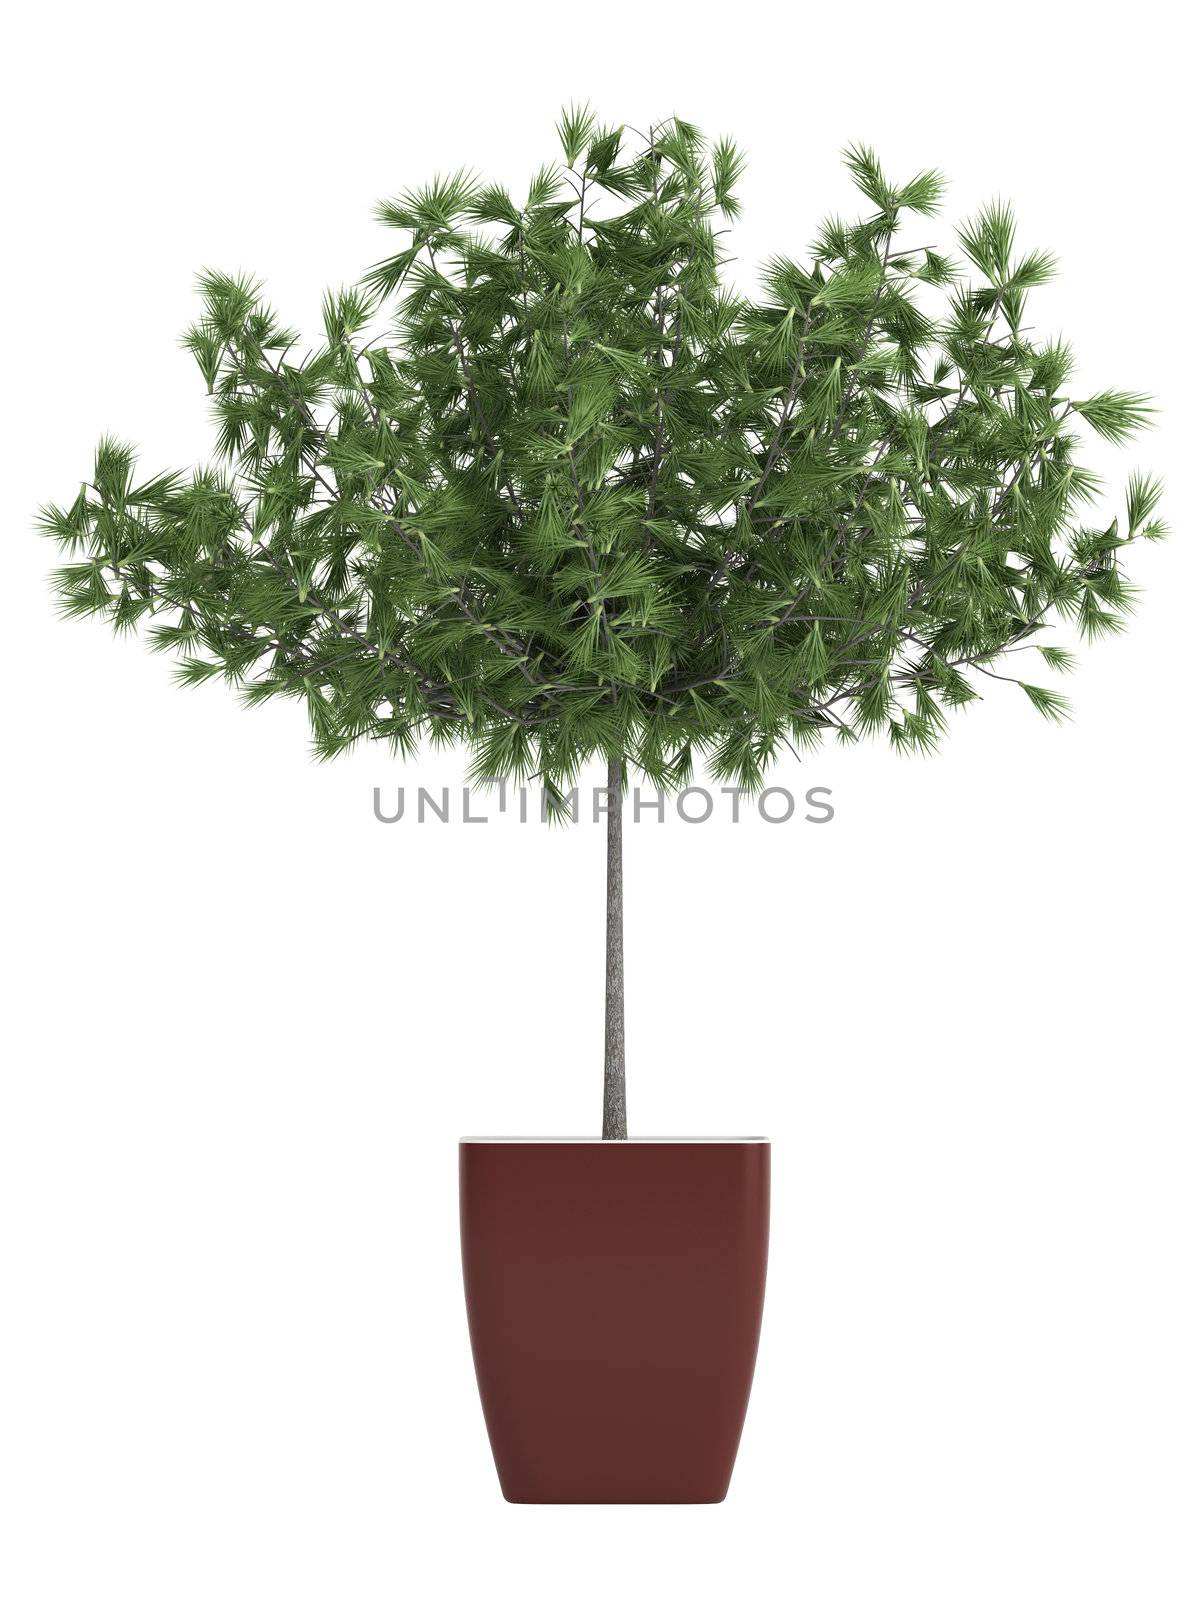 Potted manicured cypress with a trimmed stem and leafy crown growing in a rectangular ceramic container isolated on white